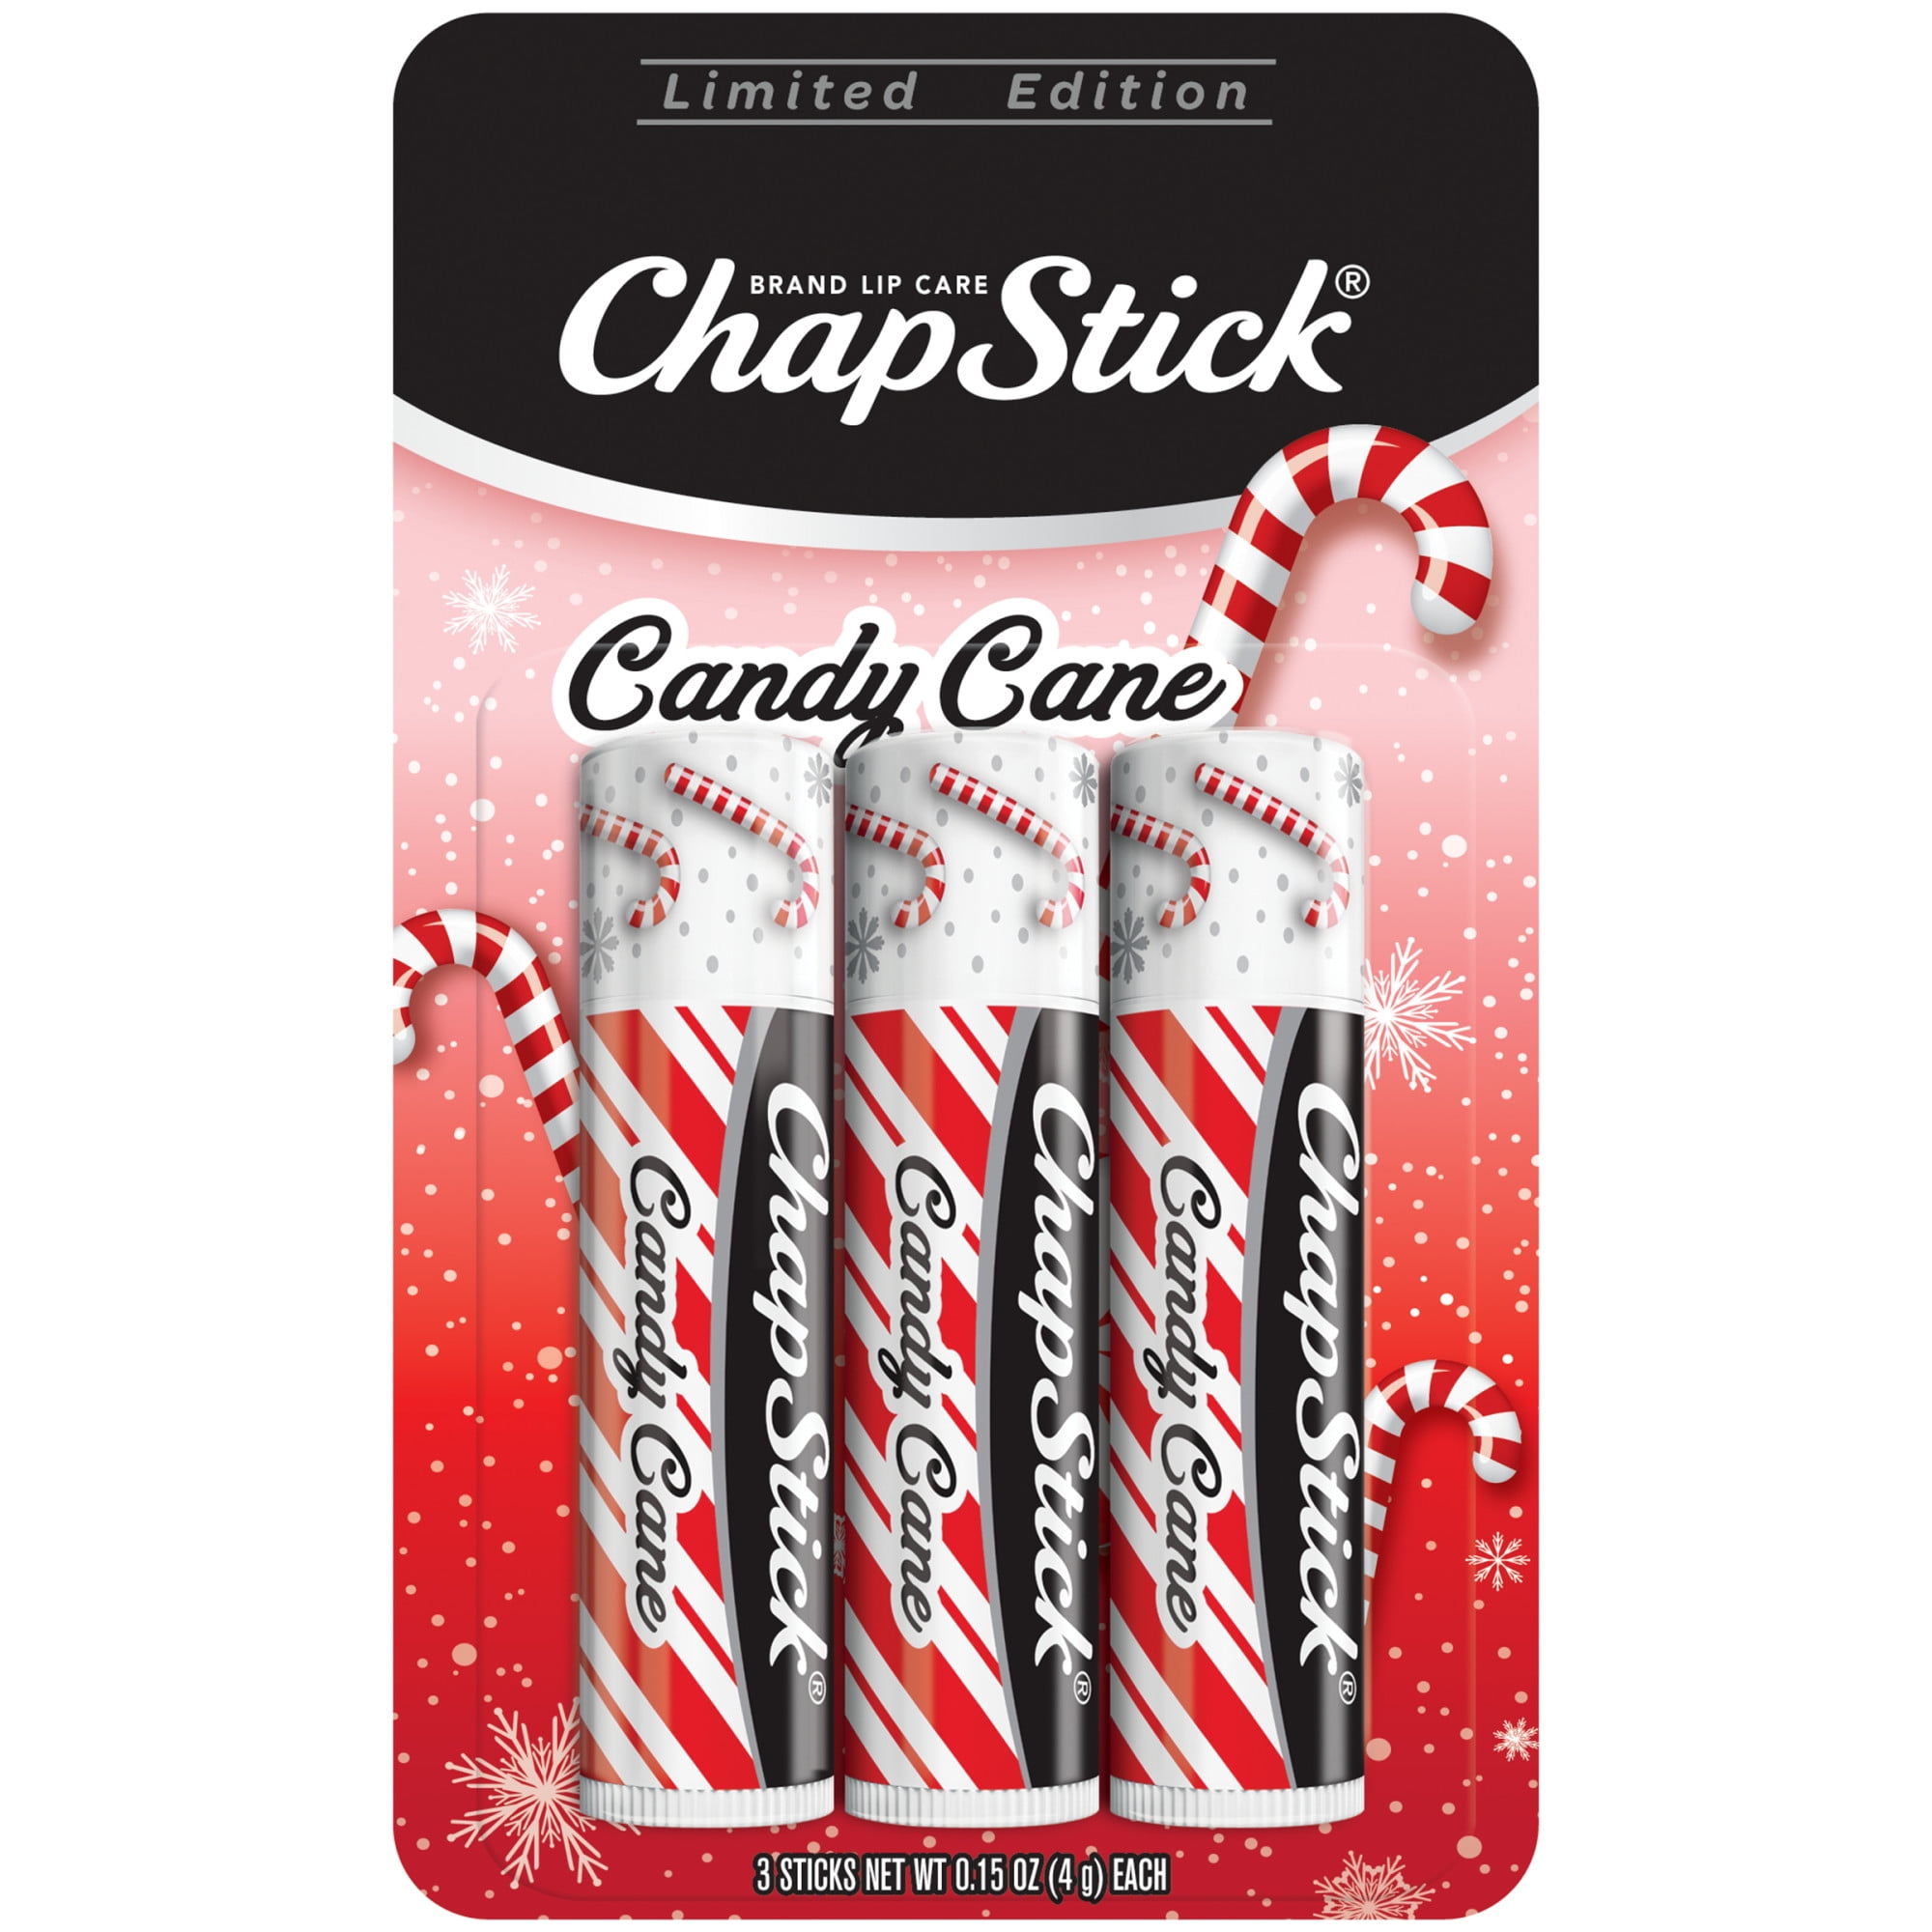 ChapStick Candy Cane Peppermint Lip Balm Tubes - 0.15 Oz (Pack of 3)